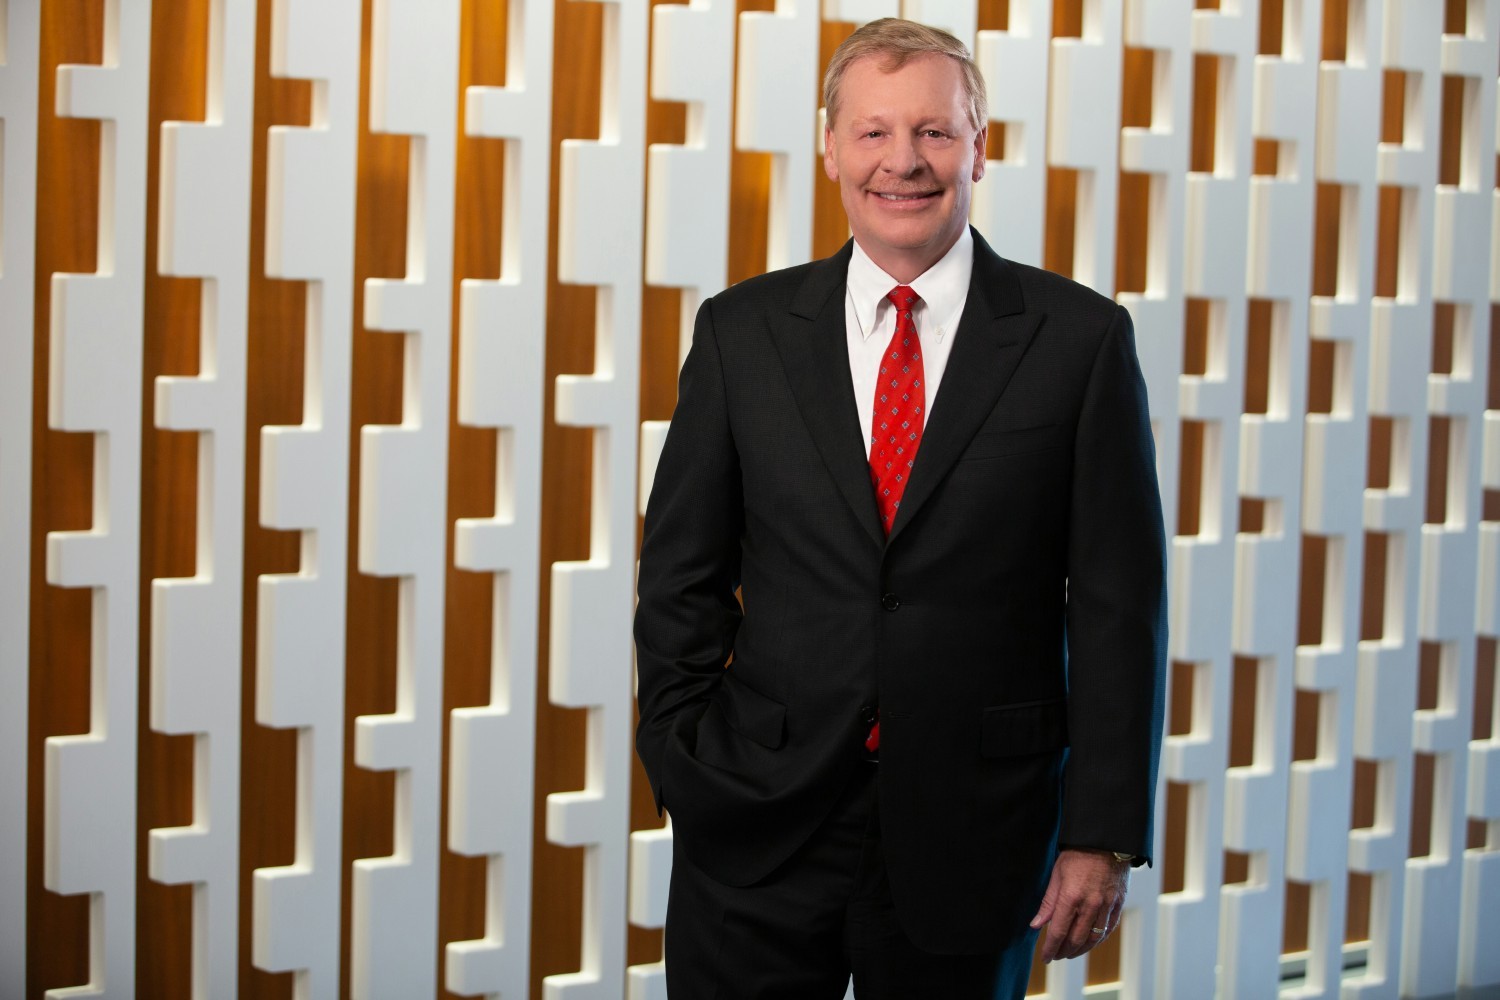 Ed Breen, DuPont Executive Chairman and Chief Executive Officer